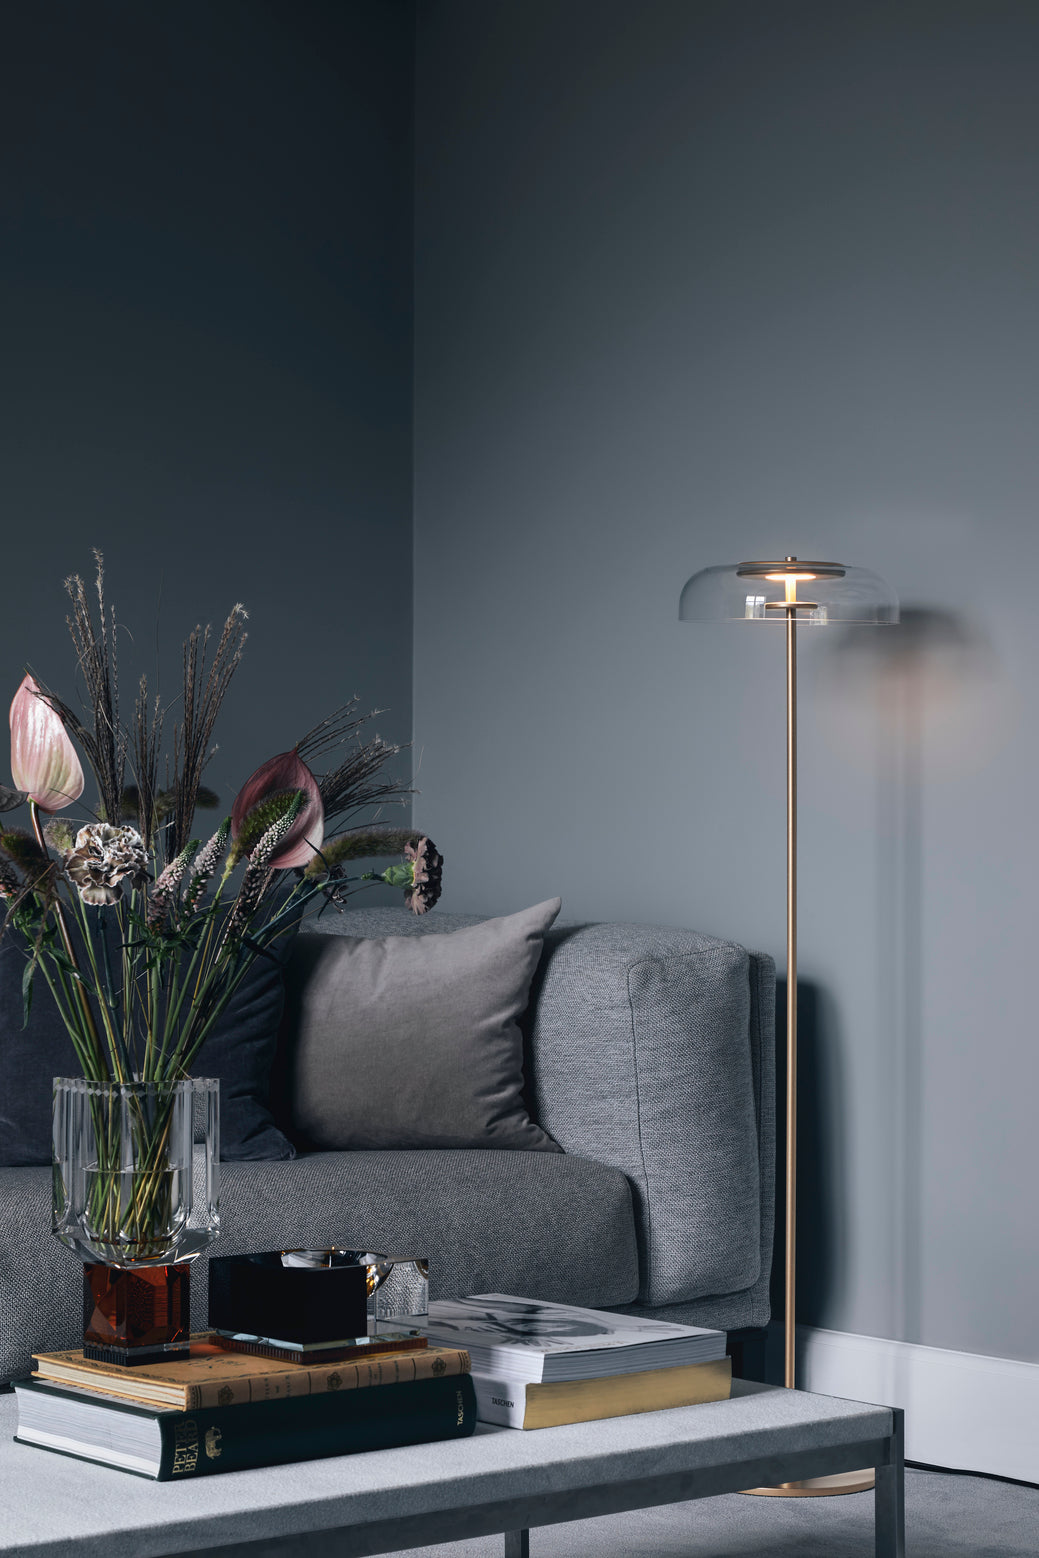 Blossi Floor Lamp - Nordic Gold / Clear